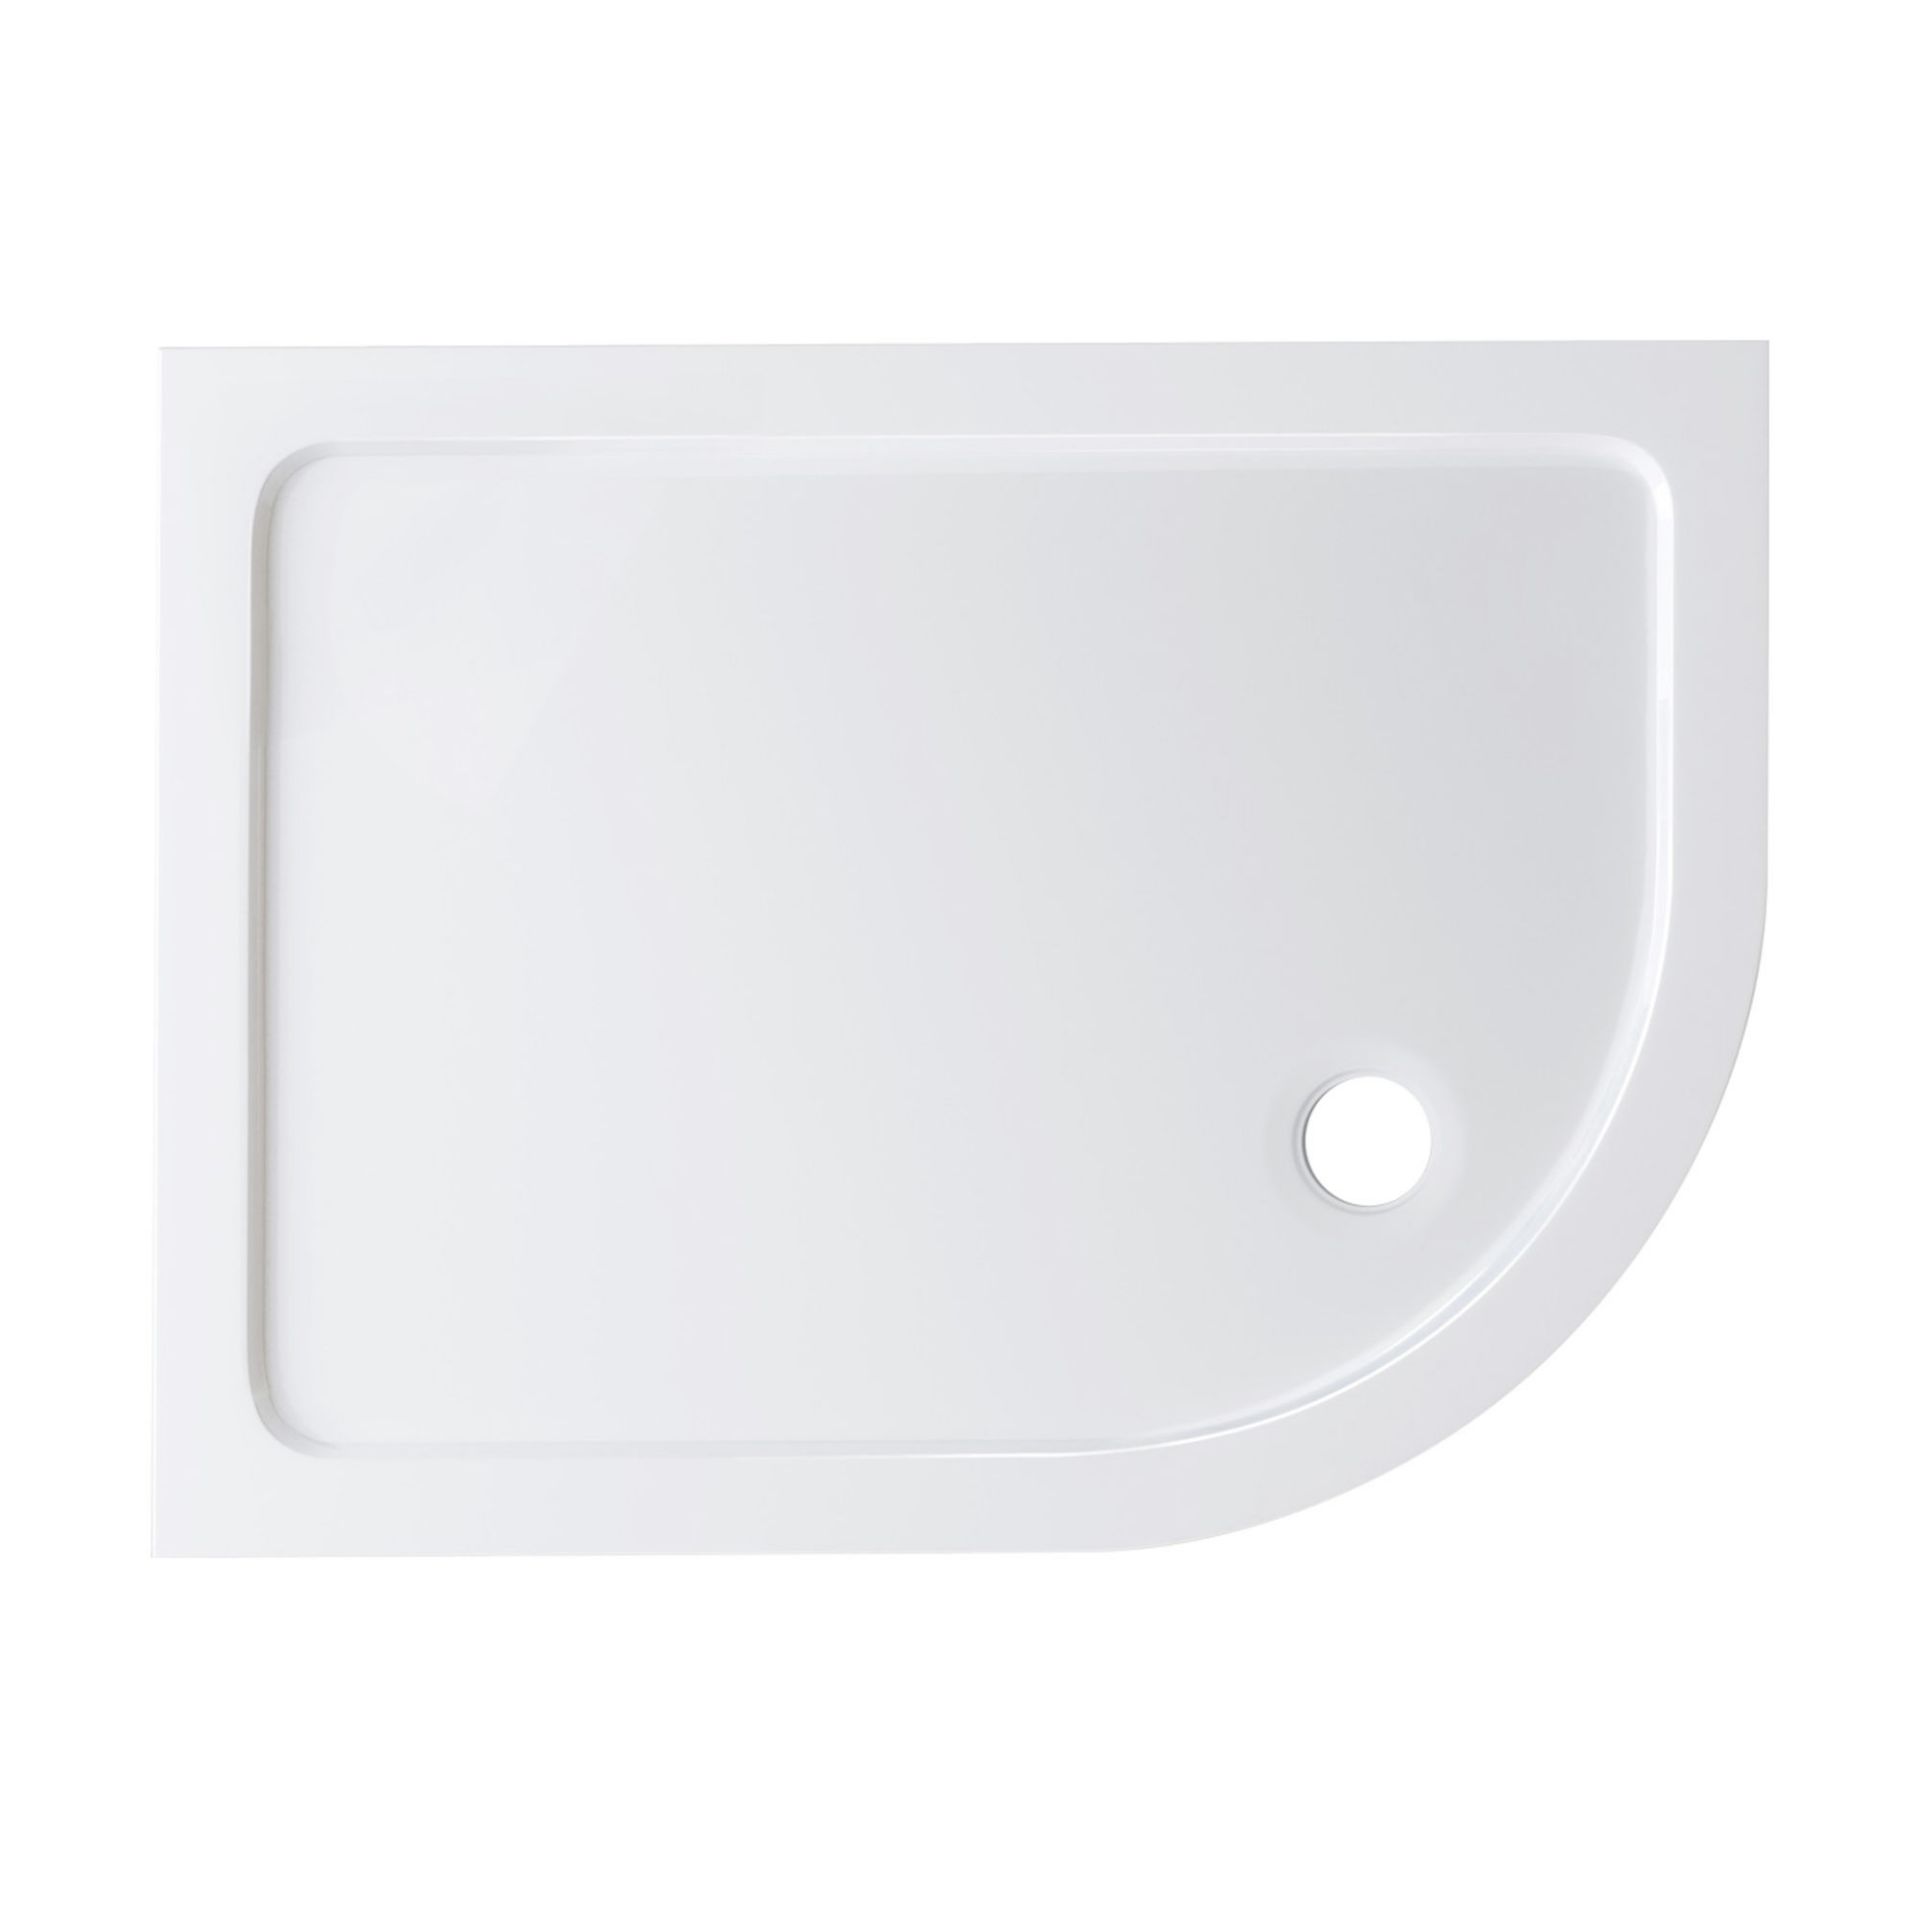 (AD54) 1200x900mm Offset Quadrant Ultra Slim Stone Shower Tray - Right. RRP £234.99. Low